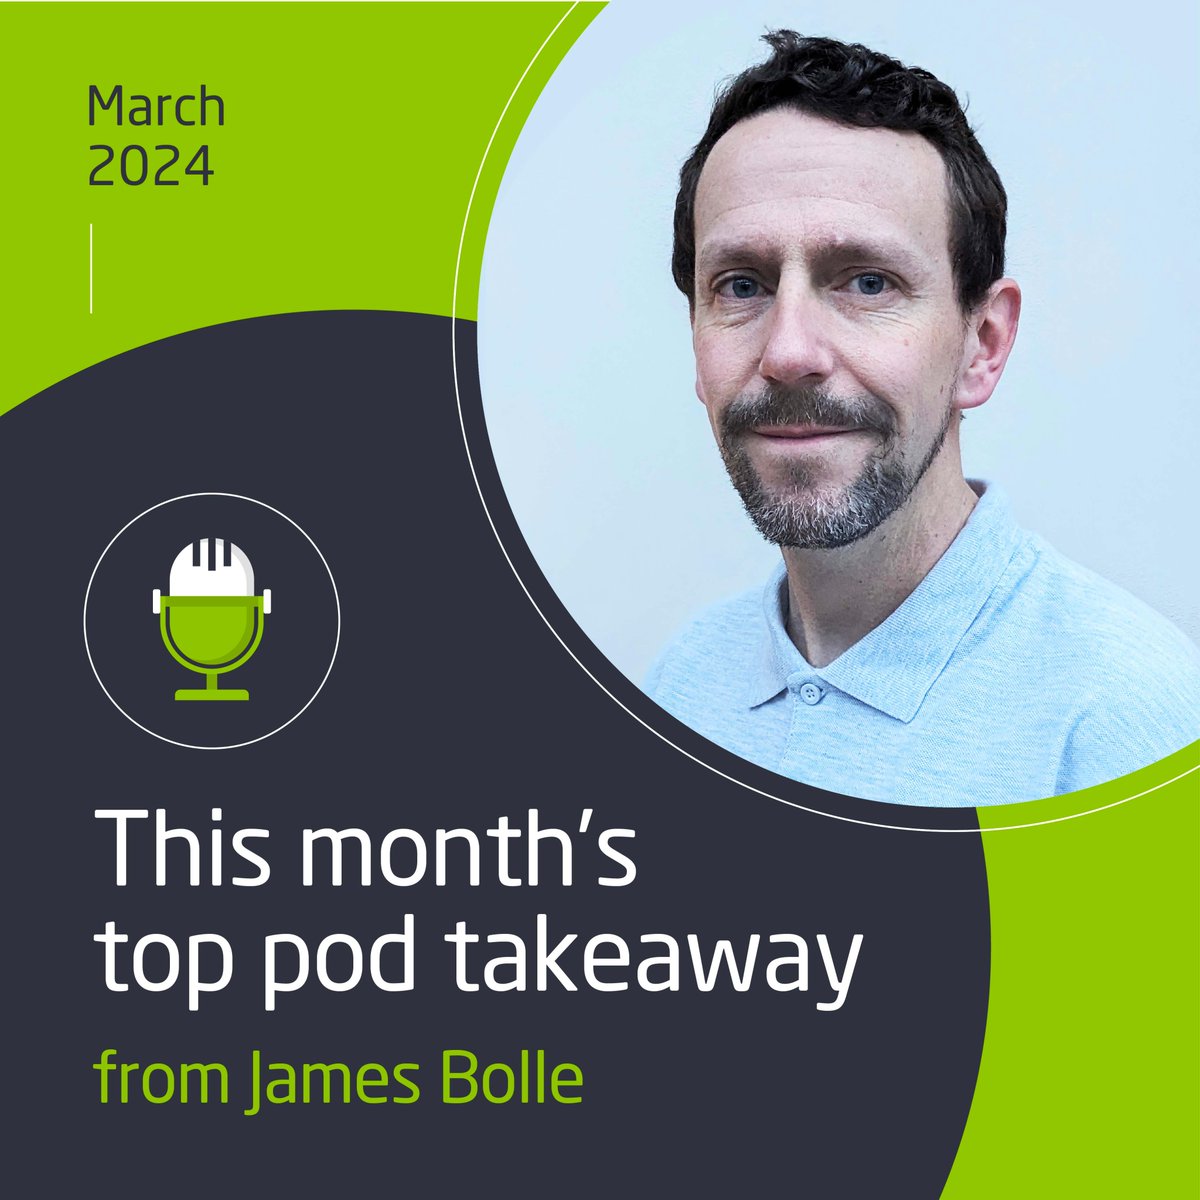 This month's podcast takeaway is from James Bolle: 'Technology is progressing so quickly & so radically that saying I have a clear view of data will look like would be a lie. But I do say, the best way to predict the future is to create it' #TheProductivityExperts